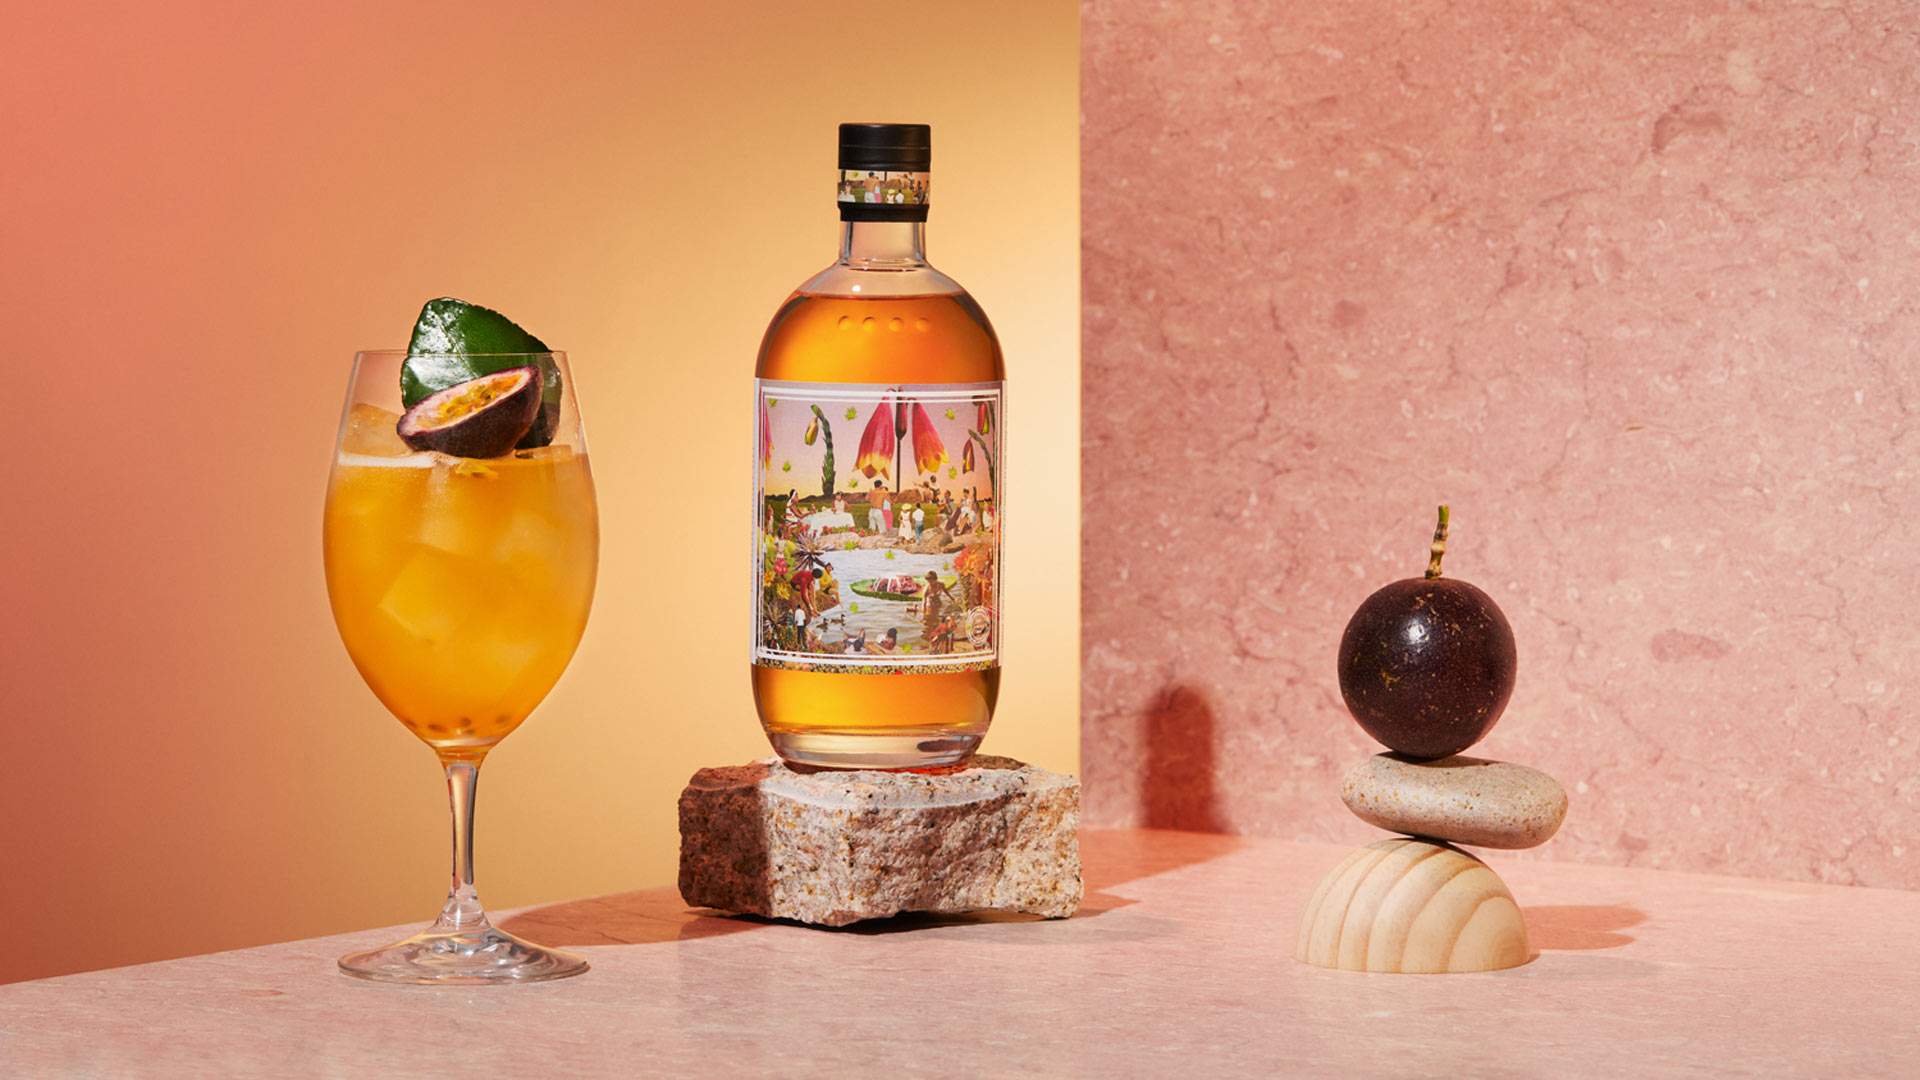 Four Pillars Is About to Drop Its 2020 Christmas Gin So You Can Get Drunk on Pud with Nan